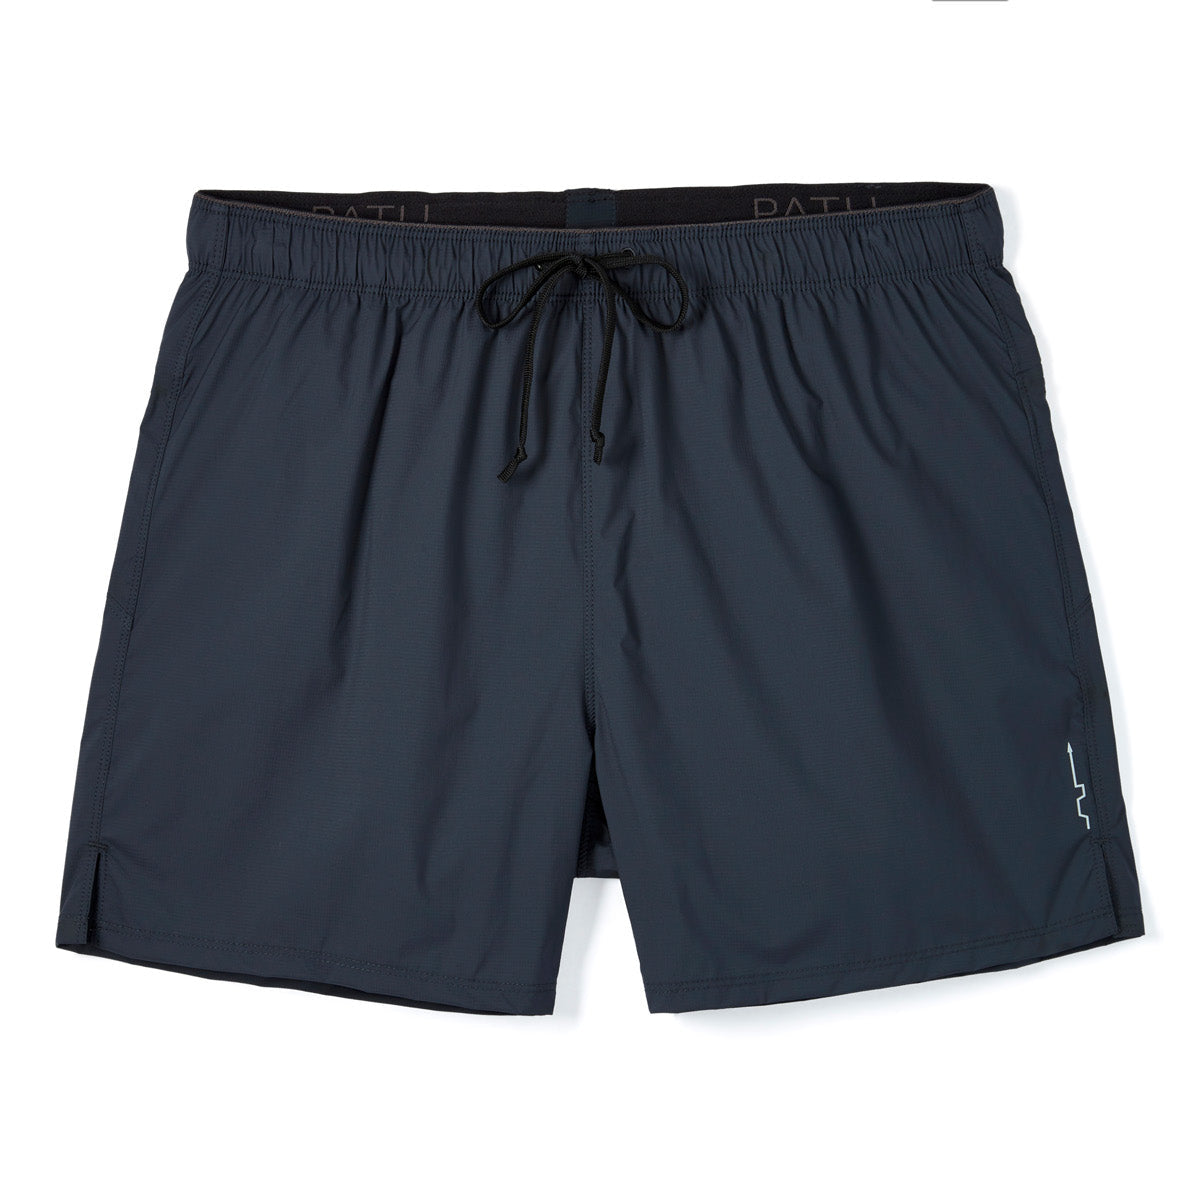 Lined vs Unlined Shorts - What Are the Benefits of Each?